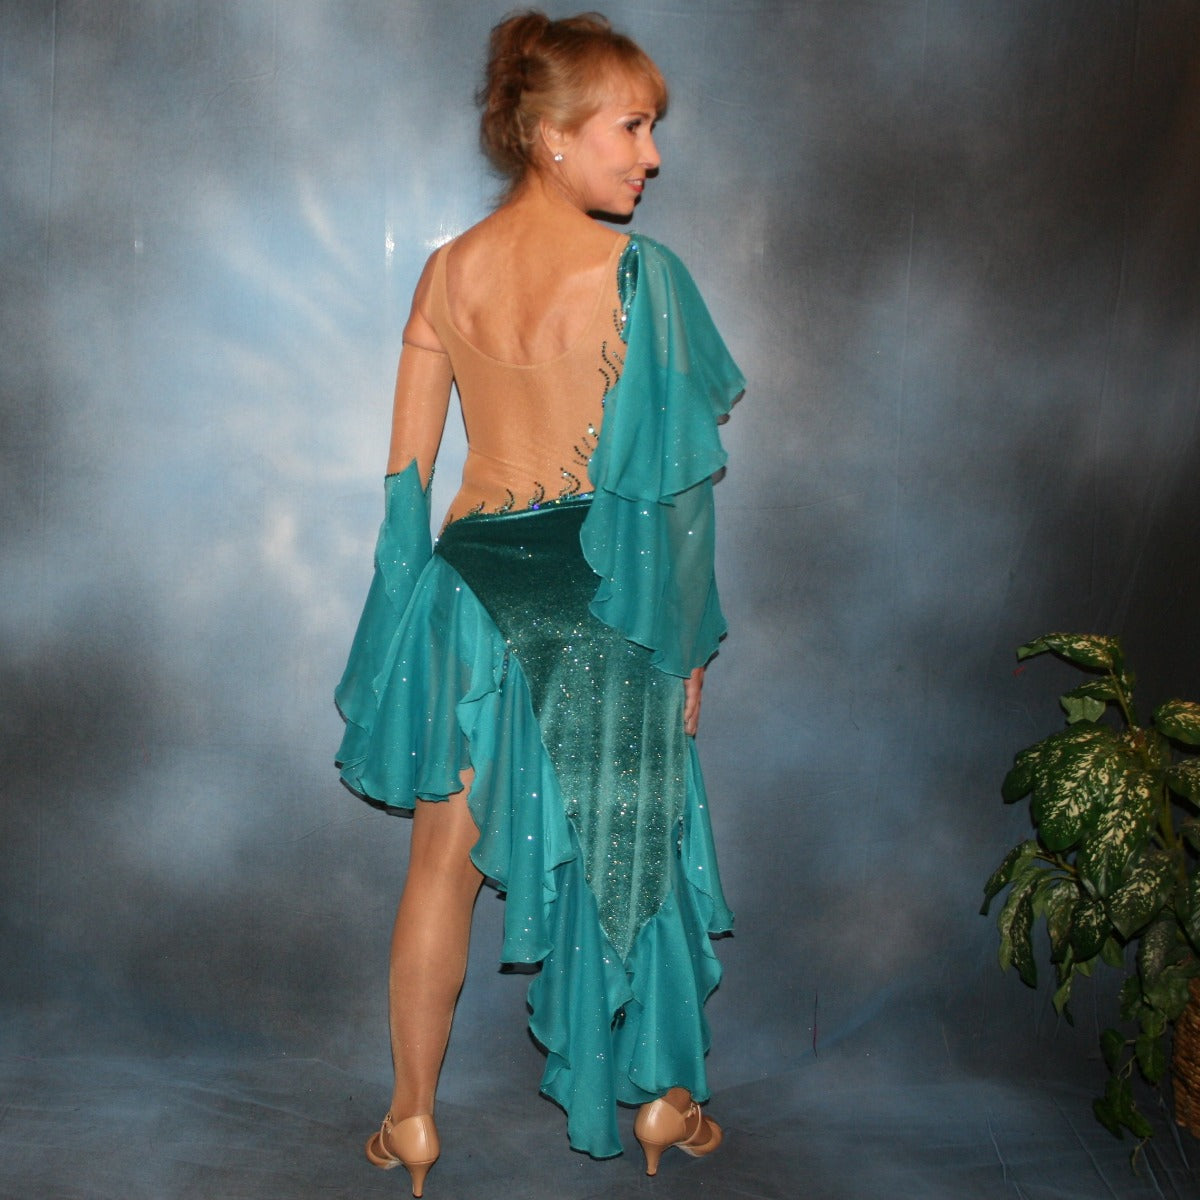 Crystal's Creations back view of Teal Latin/rhythm dress was created on a nude illusion base with luxurious teal glitter stretch velvet fabric along with flounces of teal glitter chiffon, embellished with blue zircon & blue zircon Ab Swarovski stonework plus hand beaded detailing